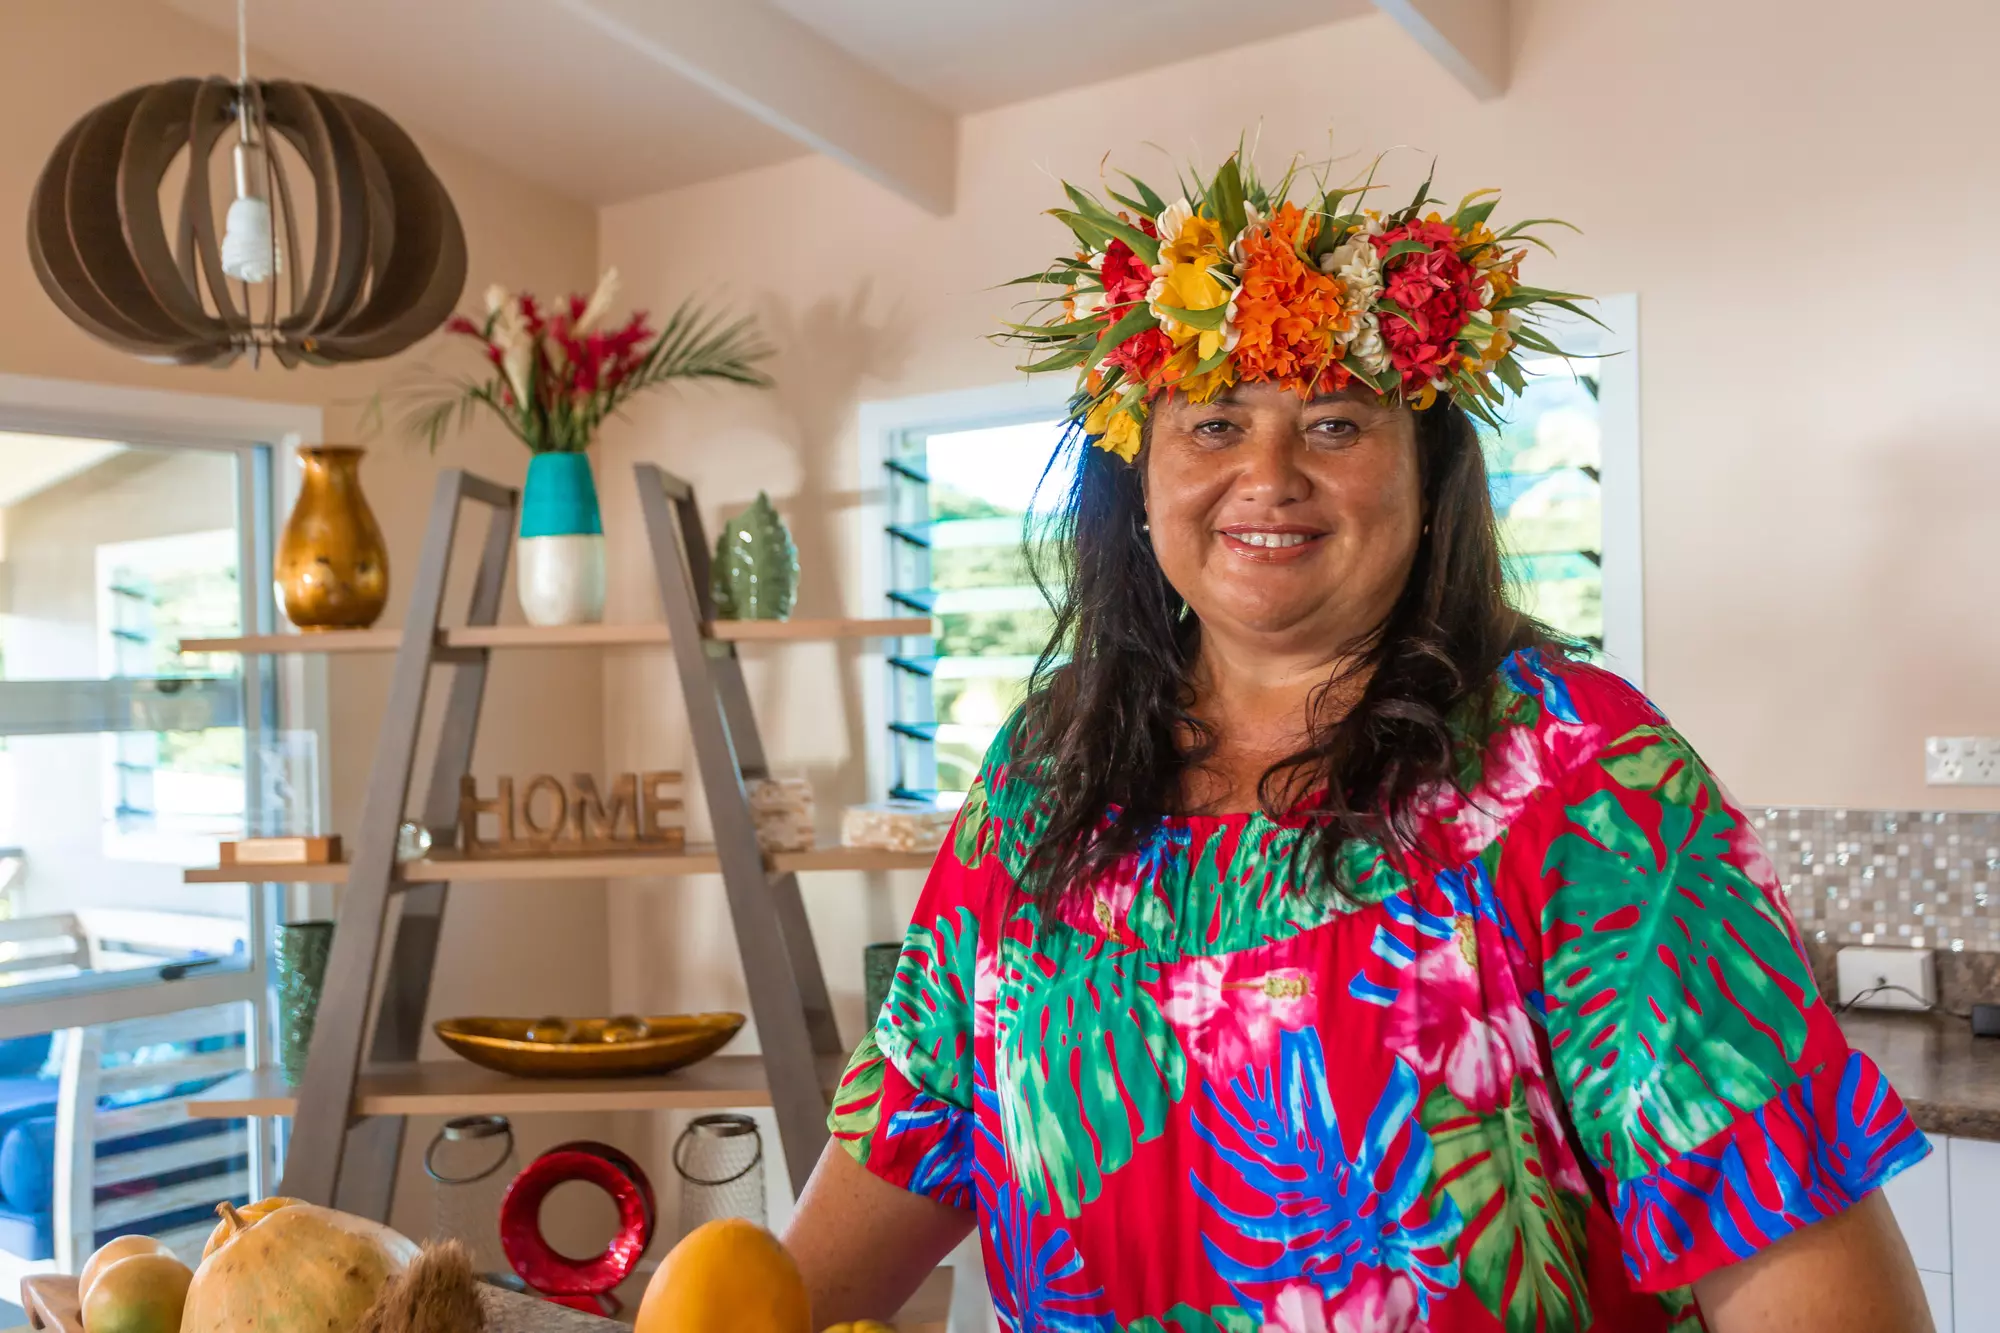 Cook Islands Promise - A Mutual Commitment to Keeping One Another